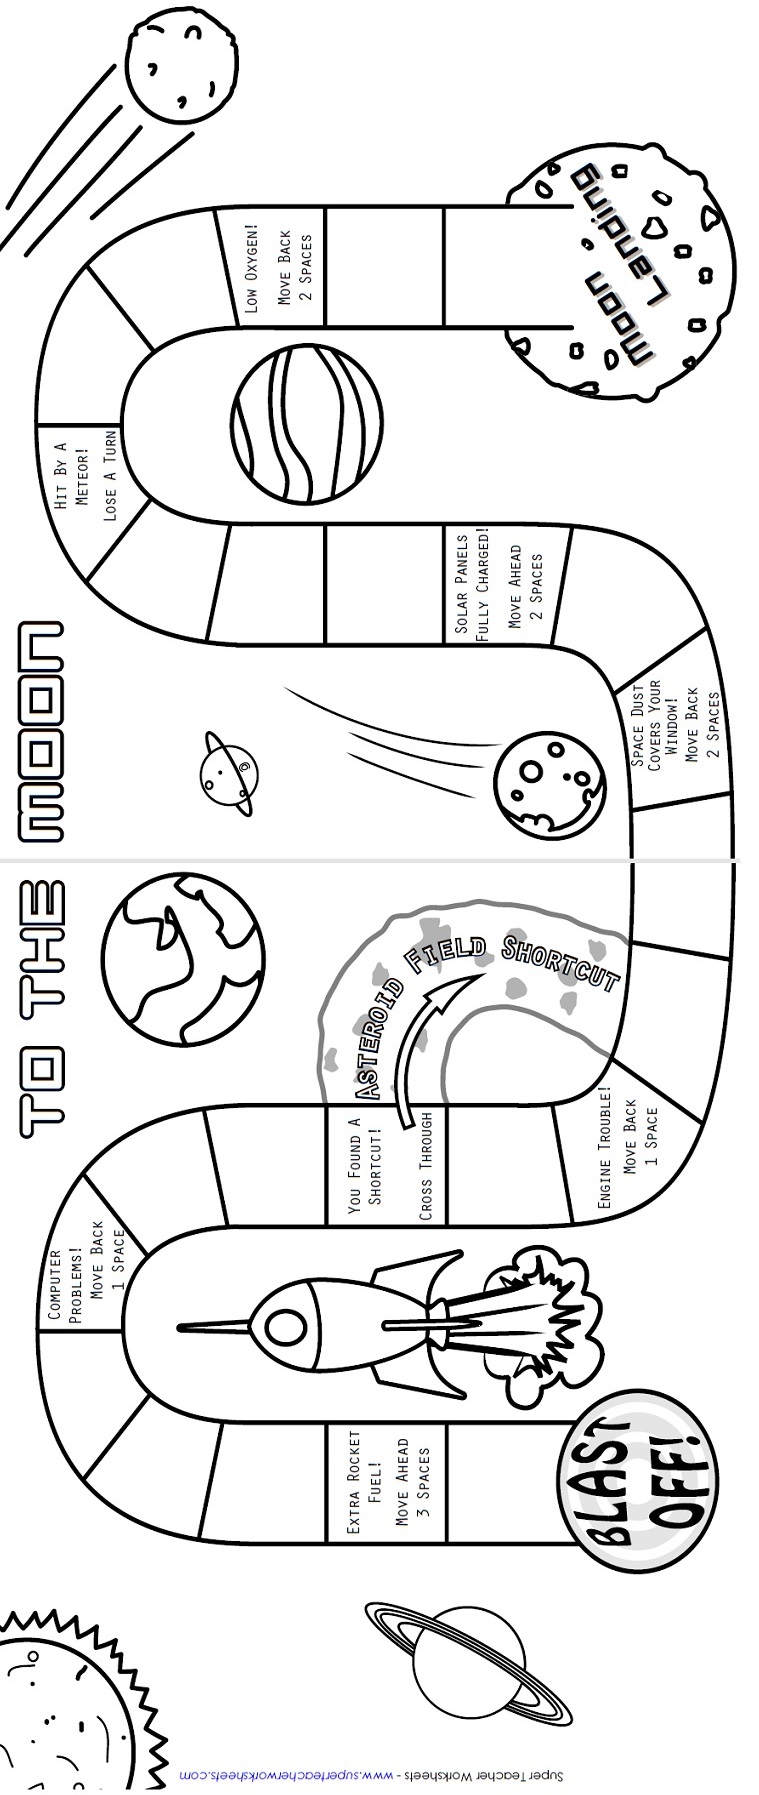 To The Moon (Printable Board Game)